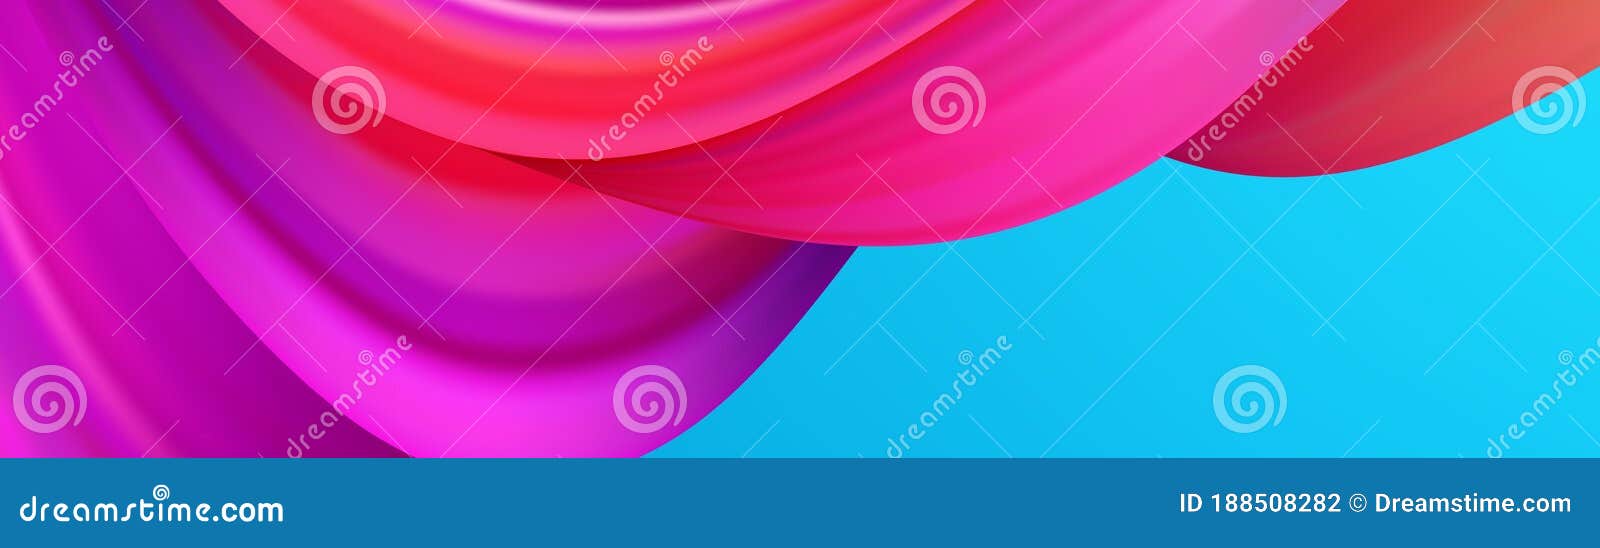 ASUS ZenBook Pro Duo Wallpaper 4K Spectrum Waves AbstractSearch  Results 2890